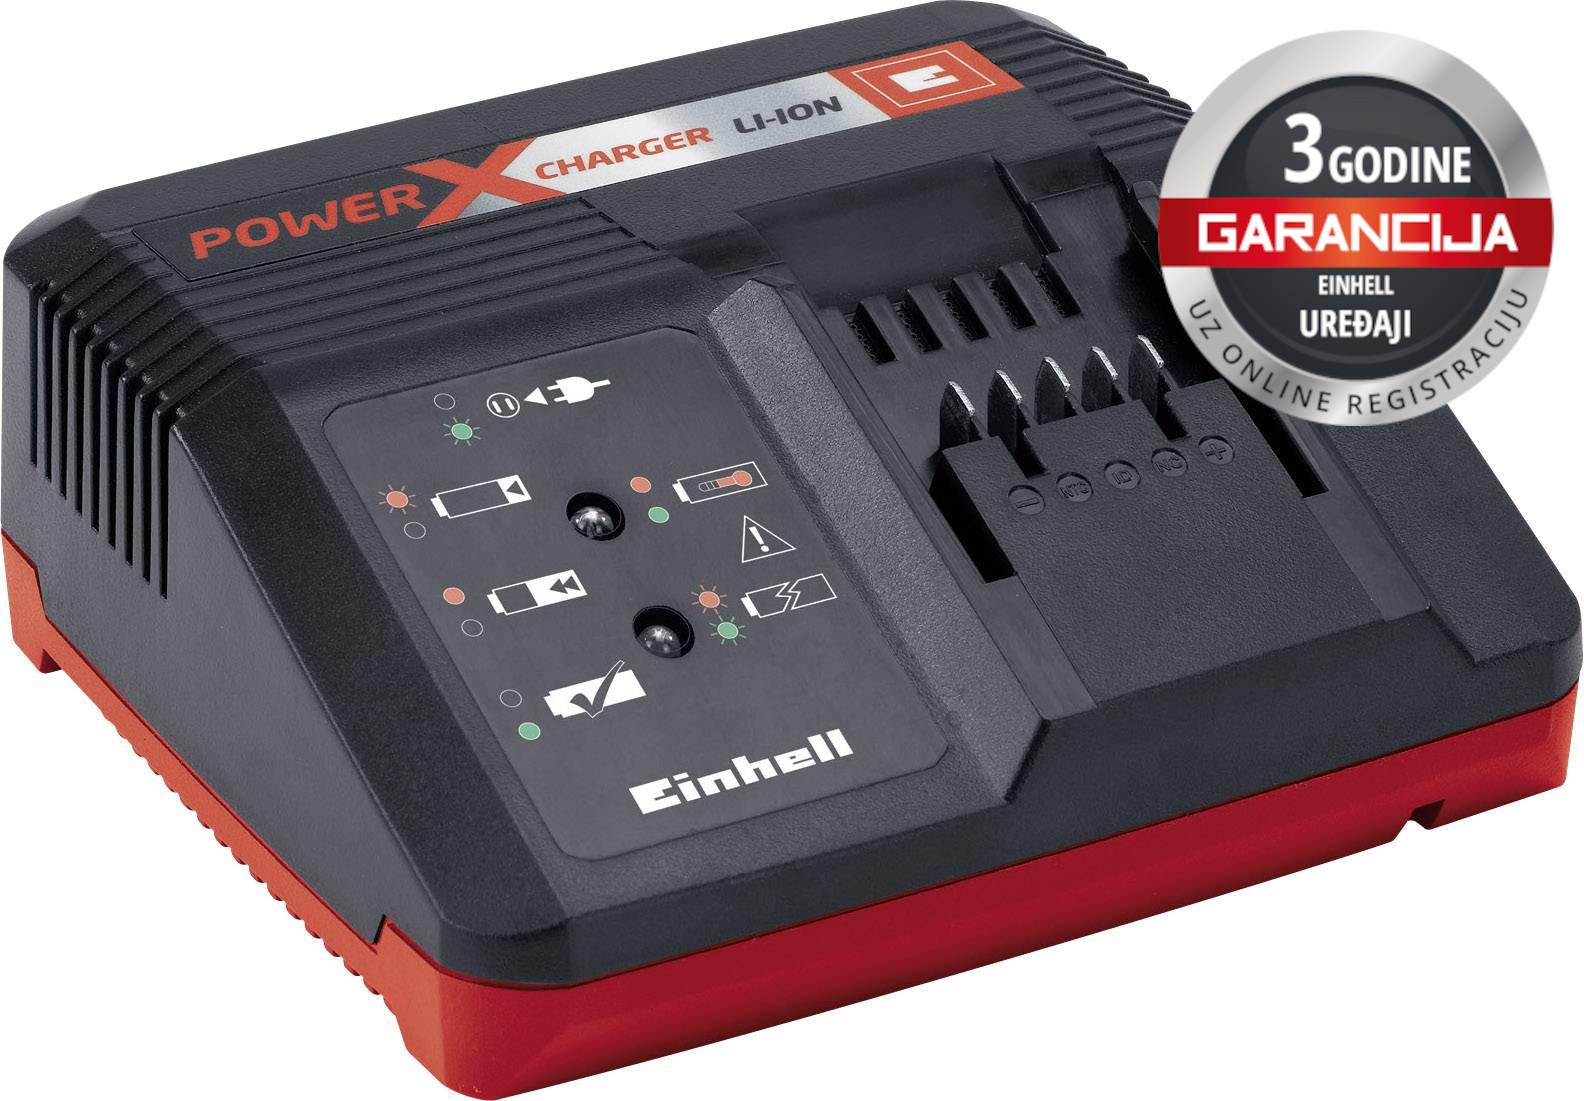 EINHELL Charger Power-X-Charger 18V 3A 30min